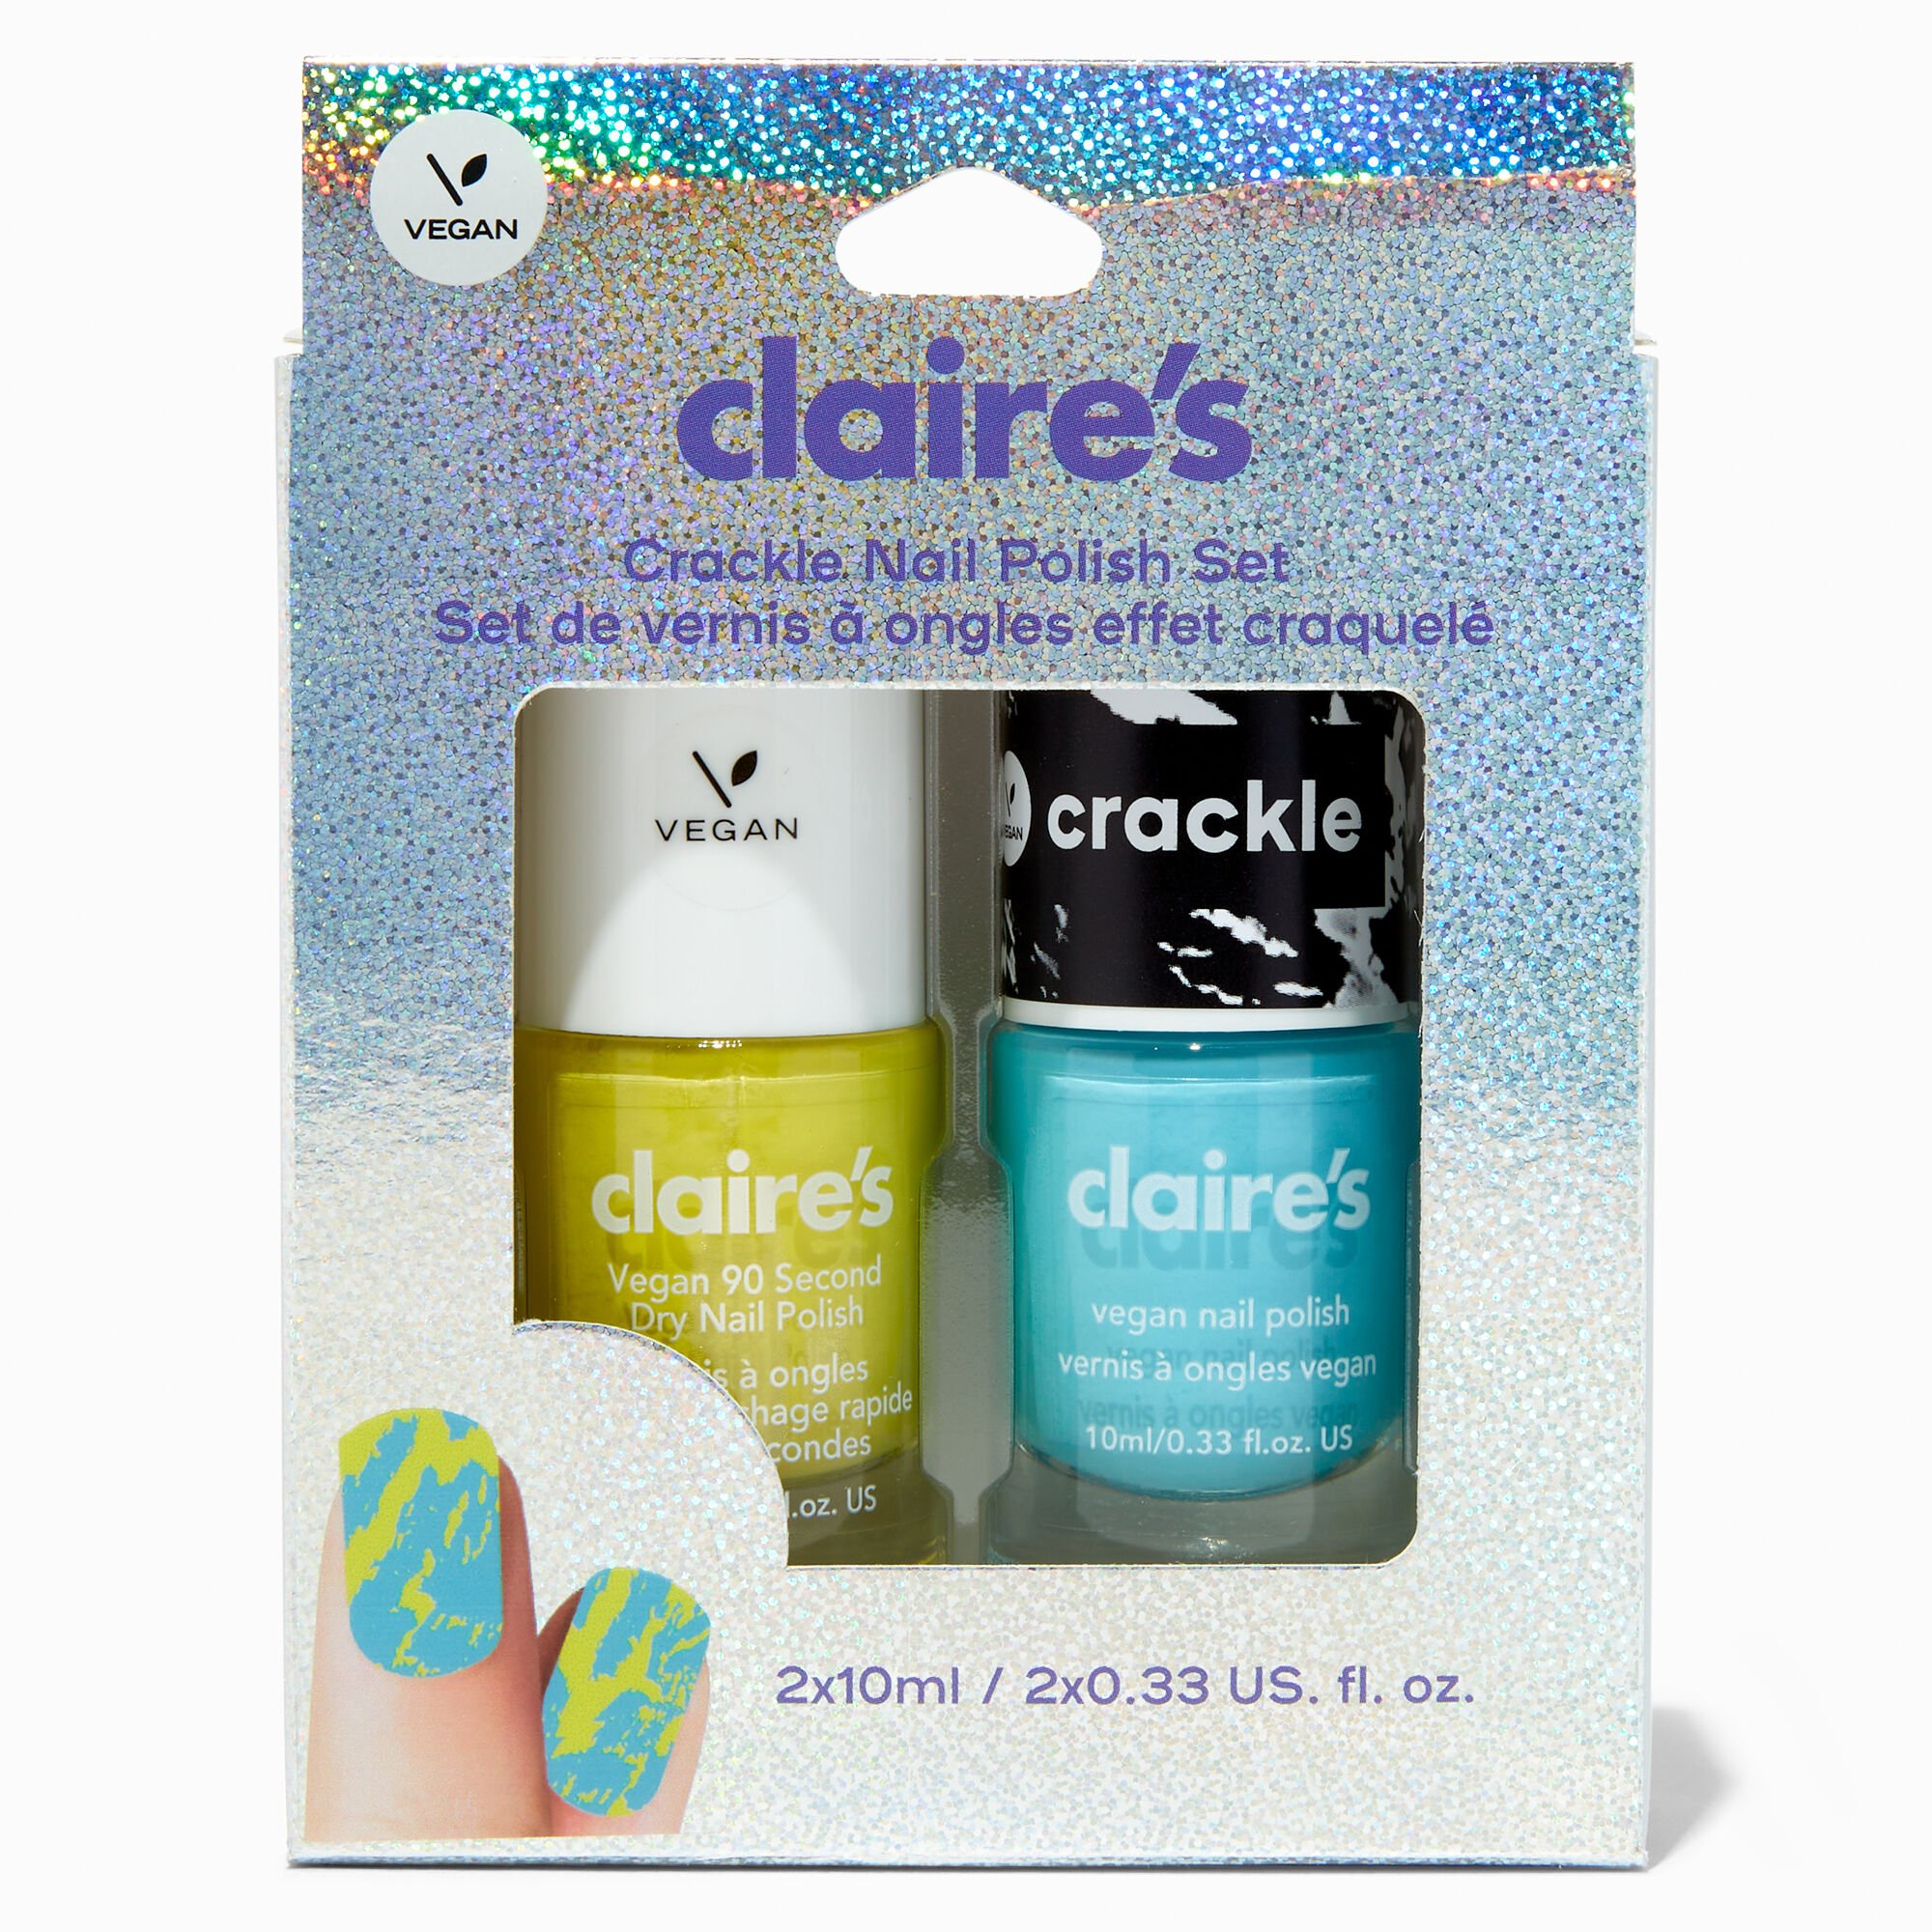 View Claires Blue Crackle Vegan Nail Polish Set 2 Pack Yellow information